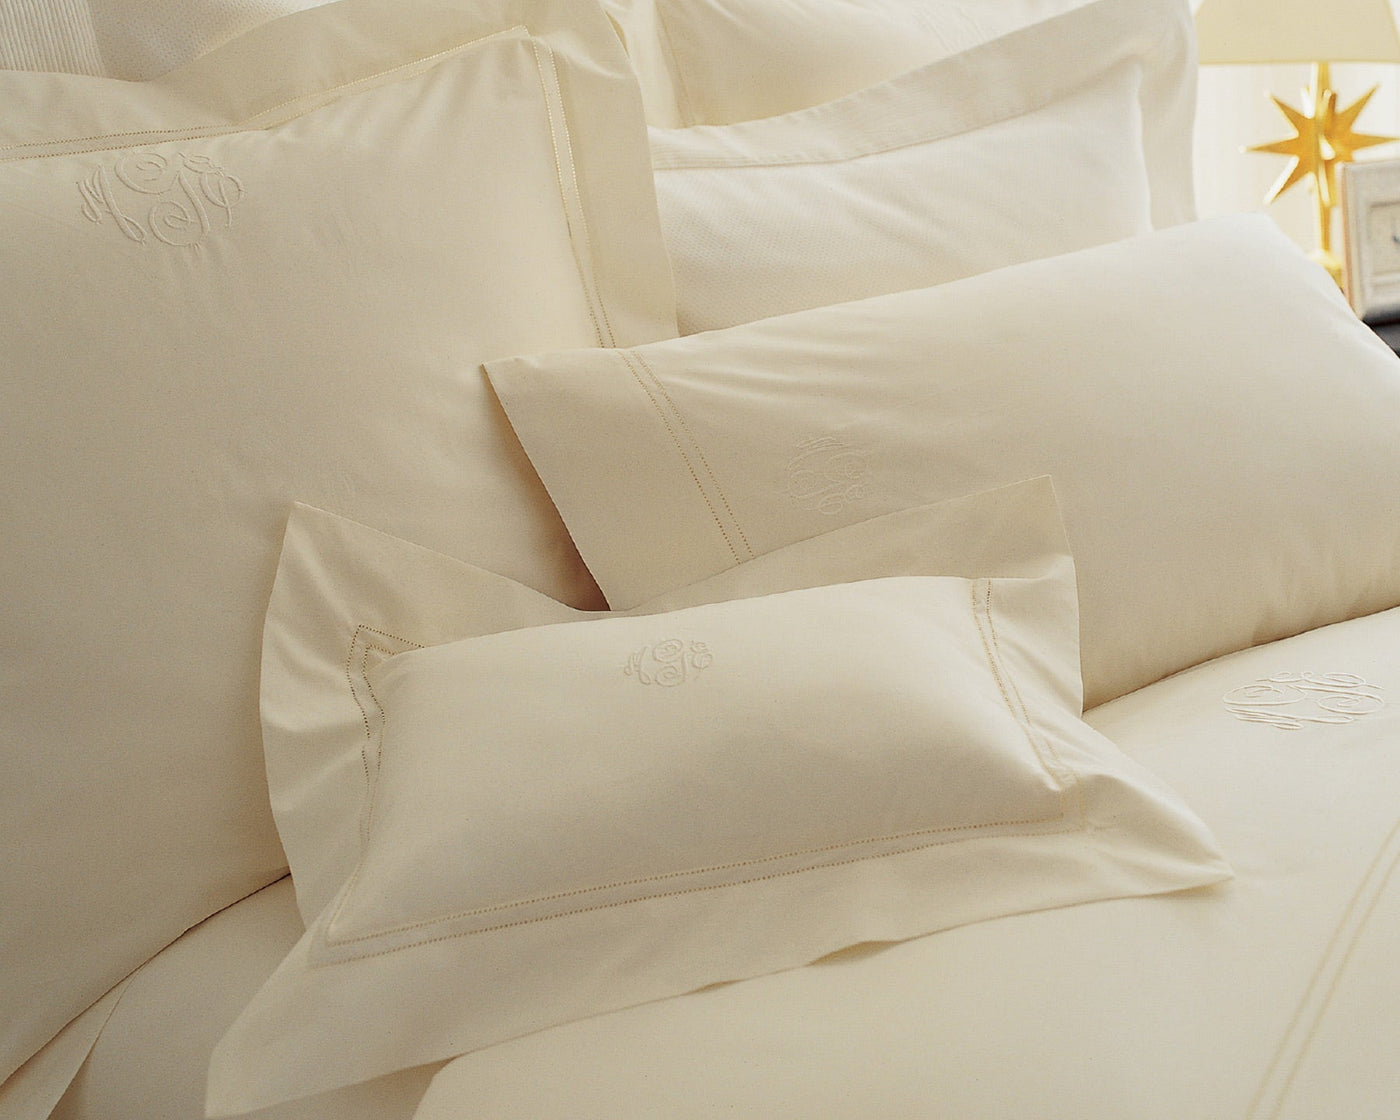 Luxury bedding collection Lyric cotton percale shams and cases in ivory on plush bed